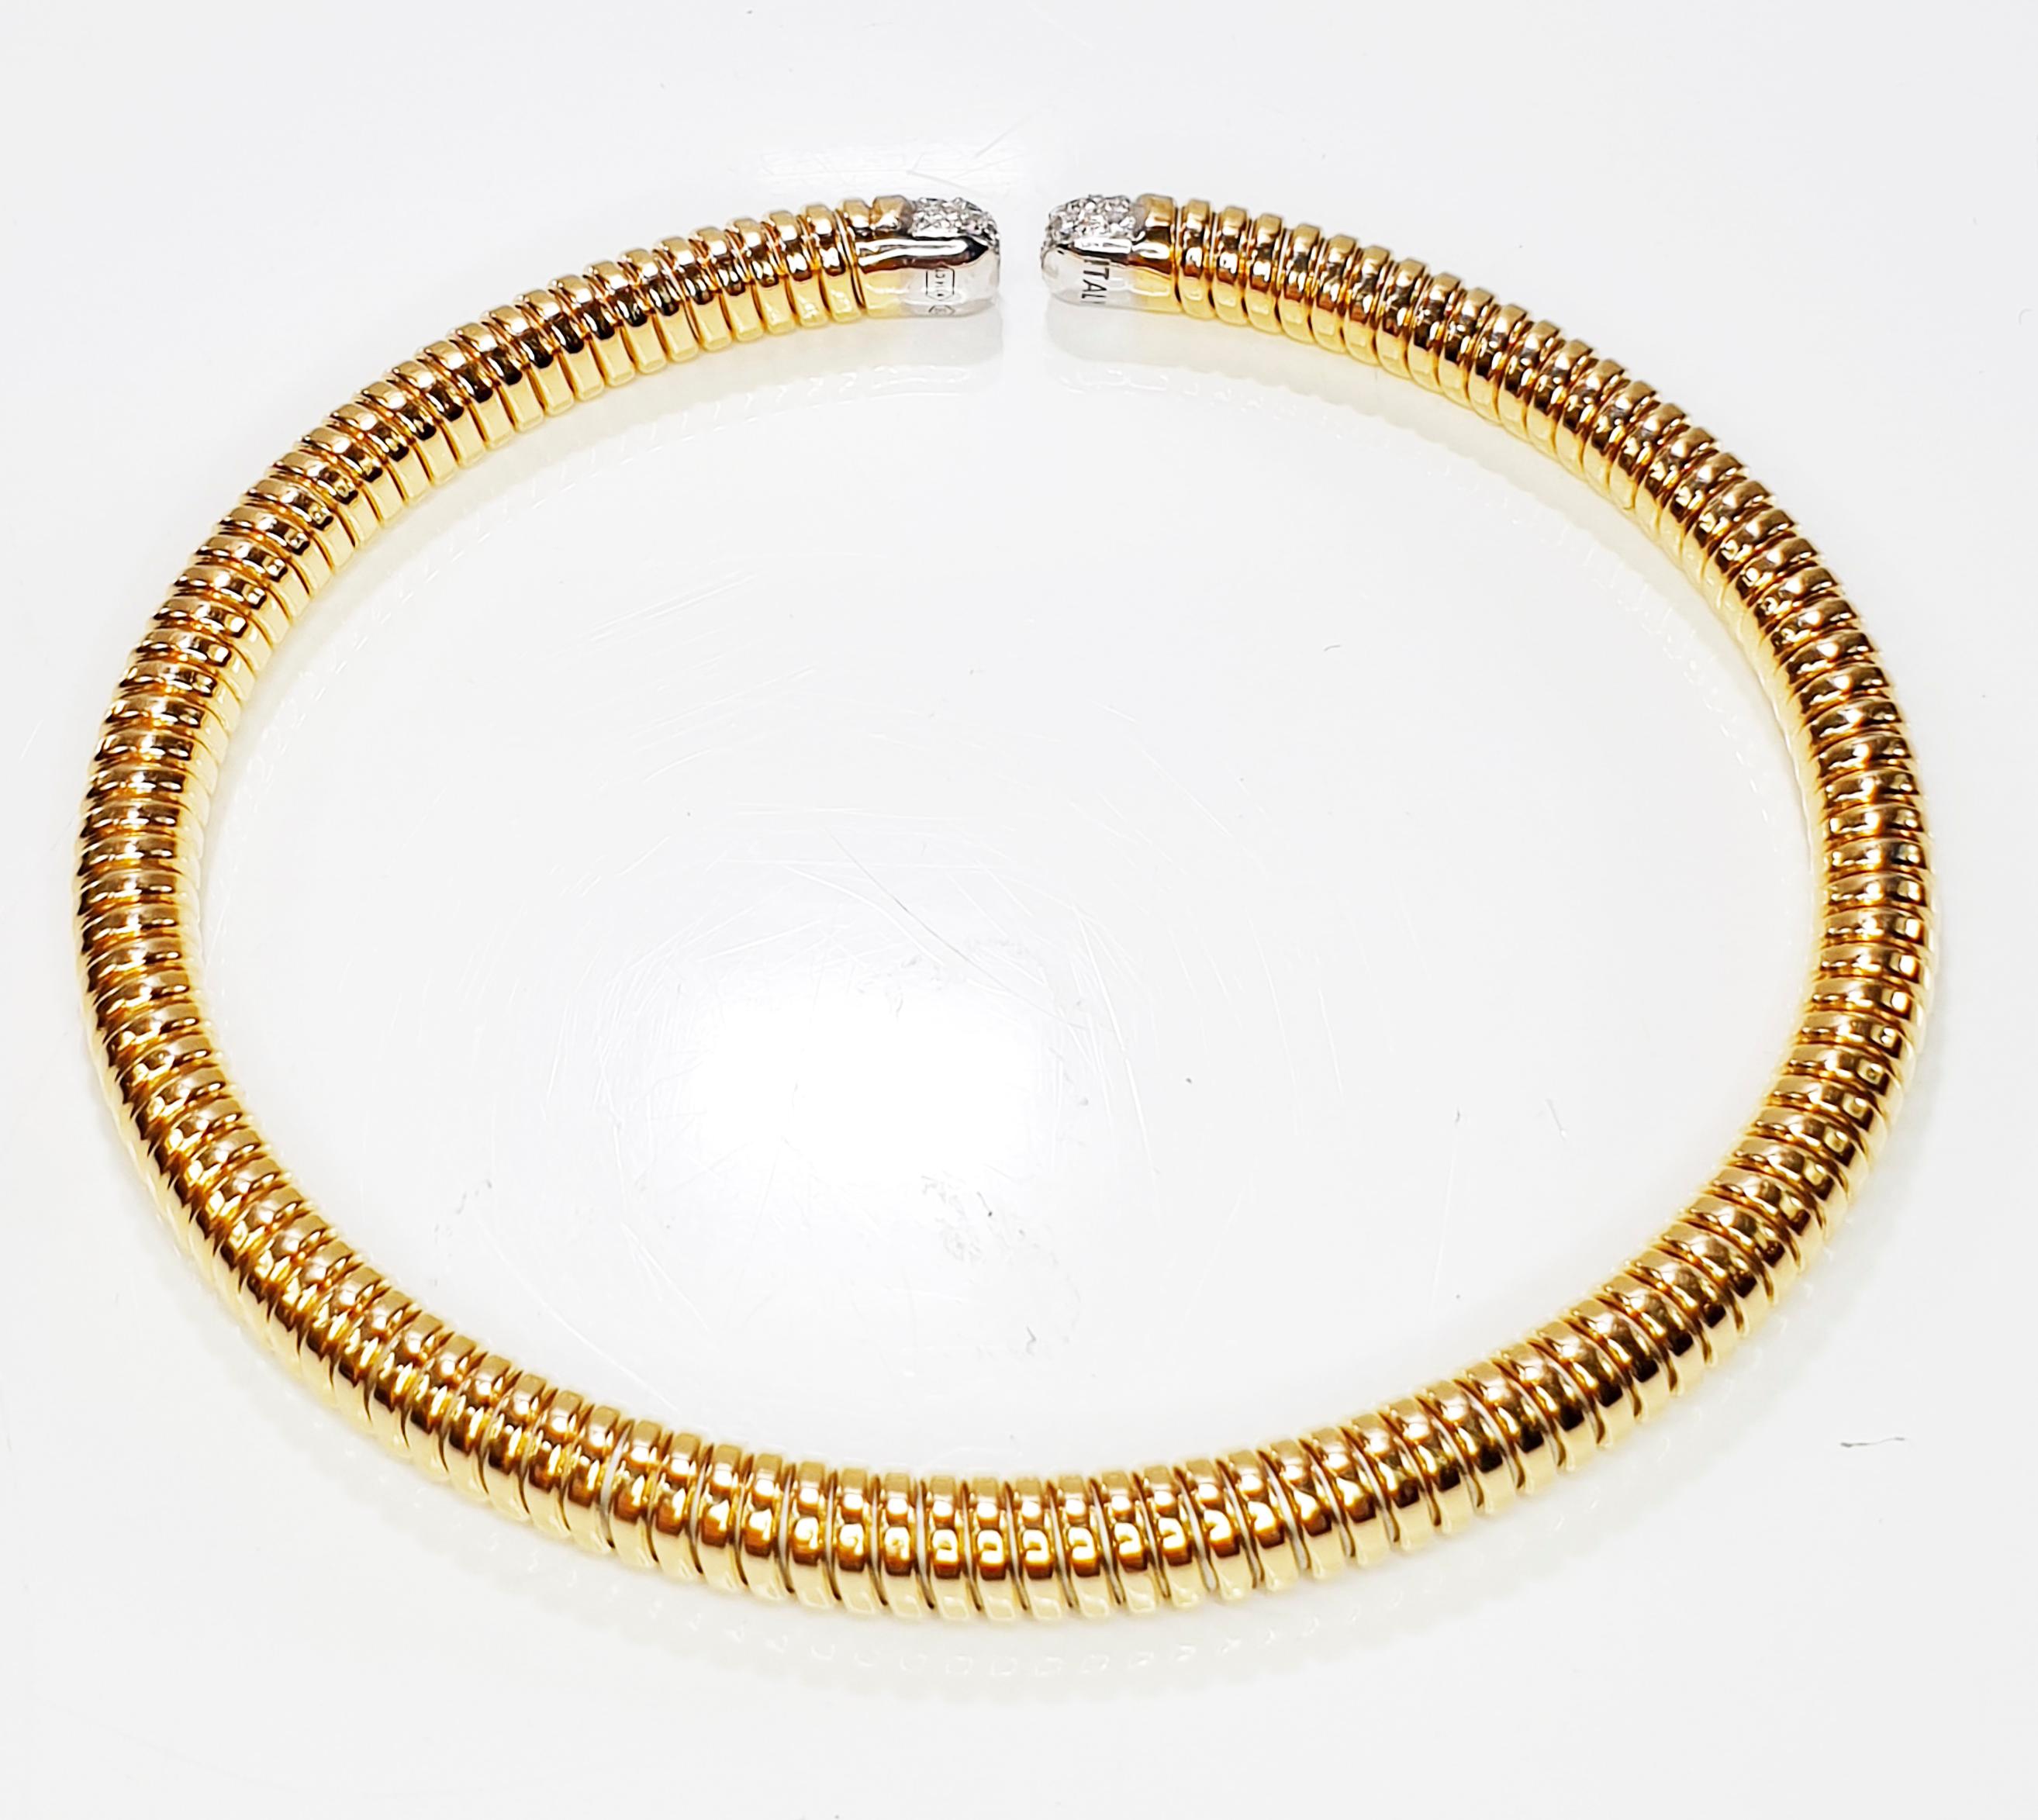 Flexible and adaptable necklace with tubogas craftmanship that fits medium to large sizes.
Available in three colours of gold, yellow, white and rose.
11,40gr and 0.25Carat Diamonds
Made in Antora, Catania Italy since 2001, the year when Antonio